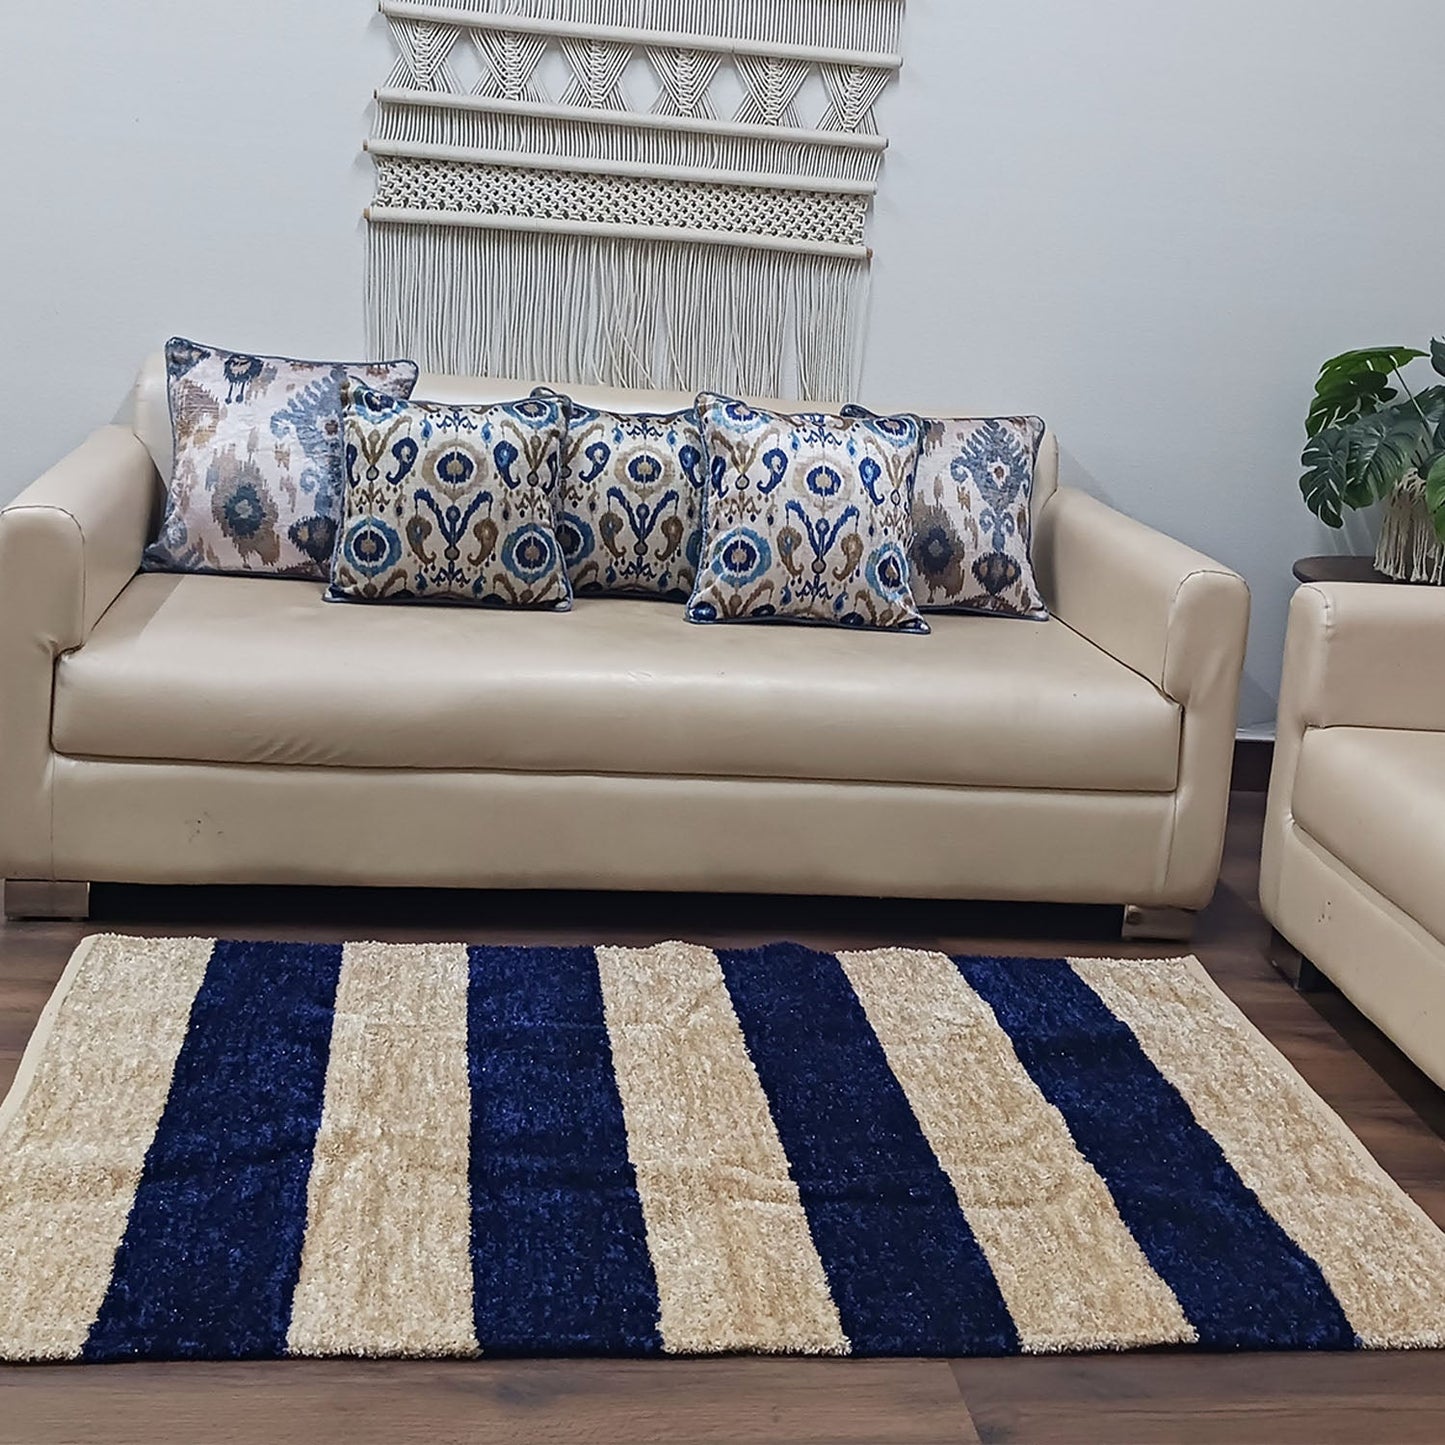 Avioni Handloom Rugs | Master Artisans Work | Feather like Luxurious Silk Soft Touch | Home Washable | Blue and White Broad stripes | Reversible